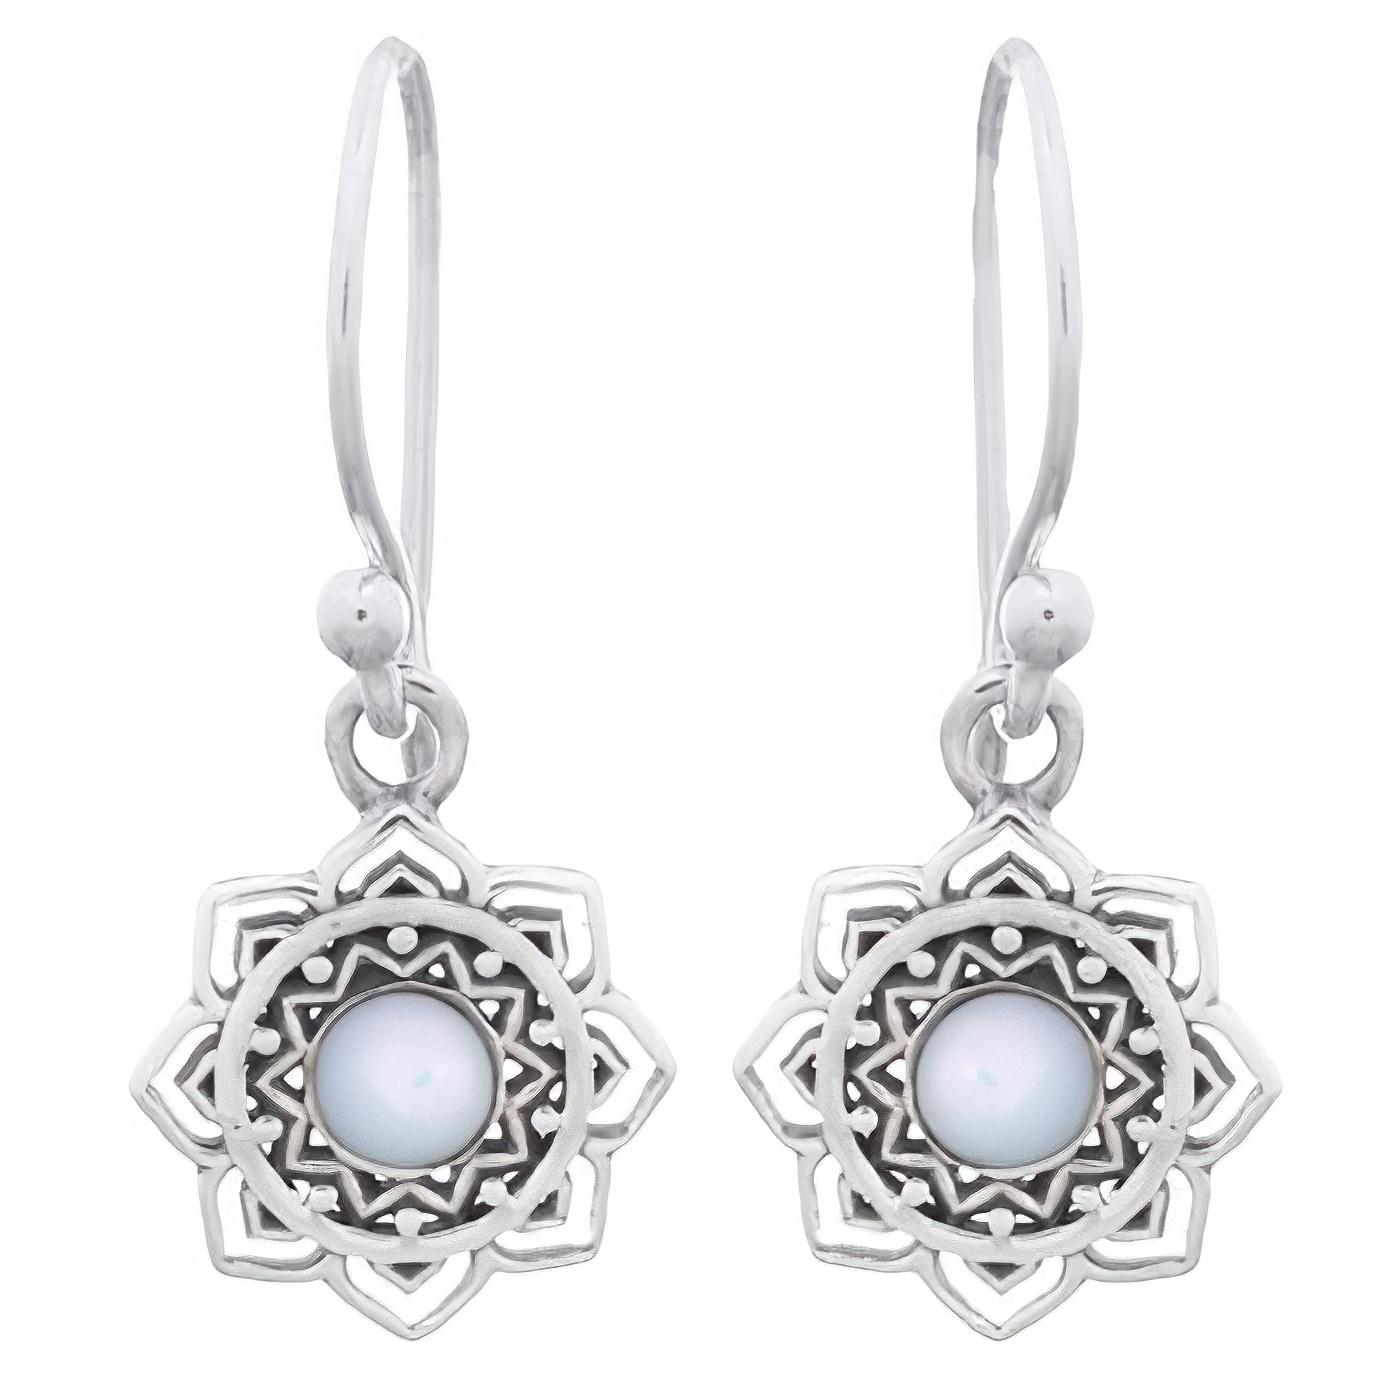 Mandala Flower With Mother Of Pearl Silver Earrings by BeYindi 